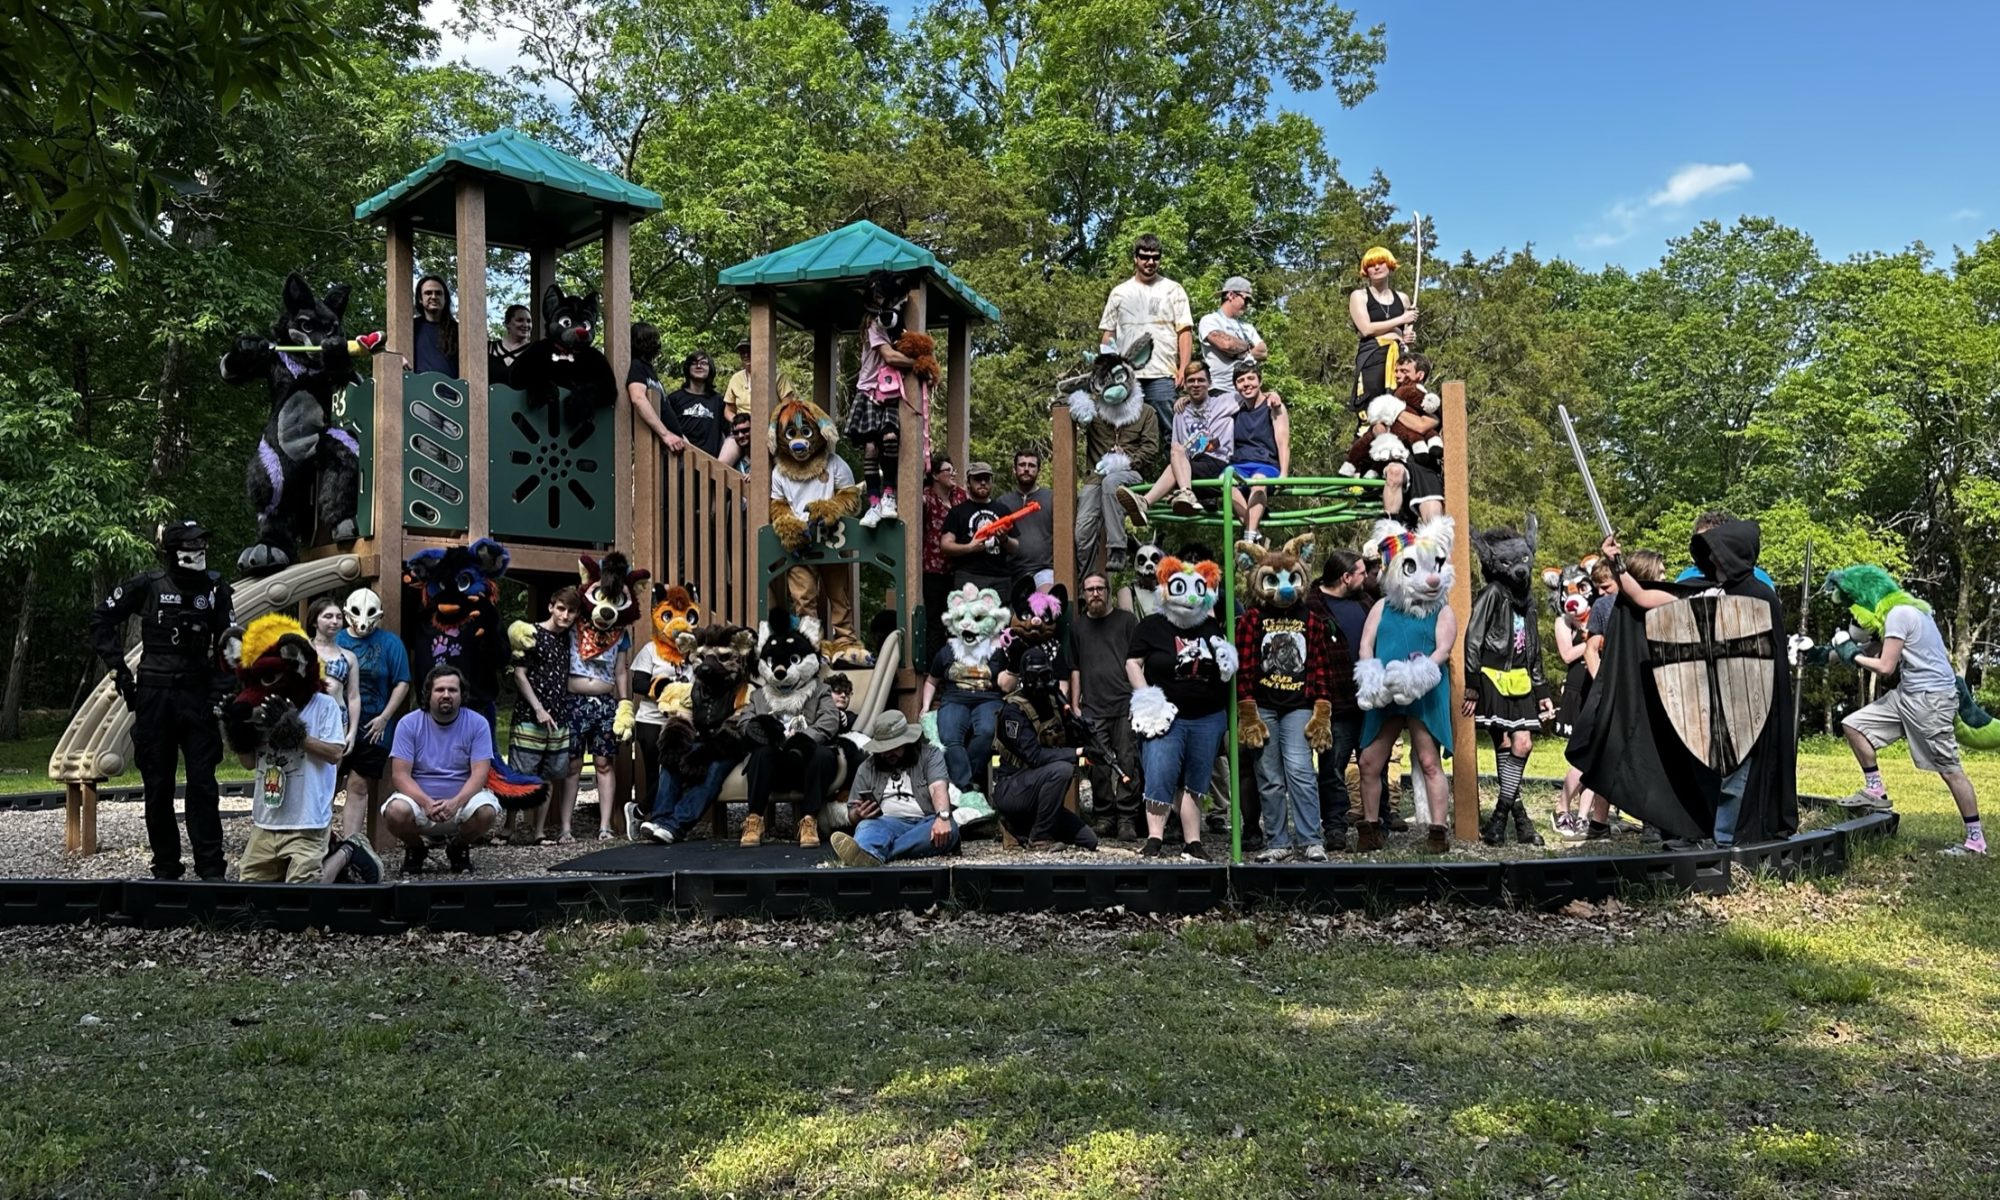 Furries at a playground